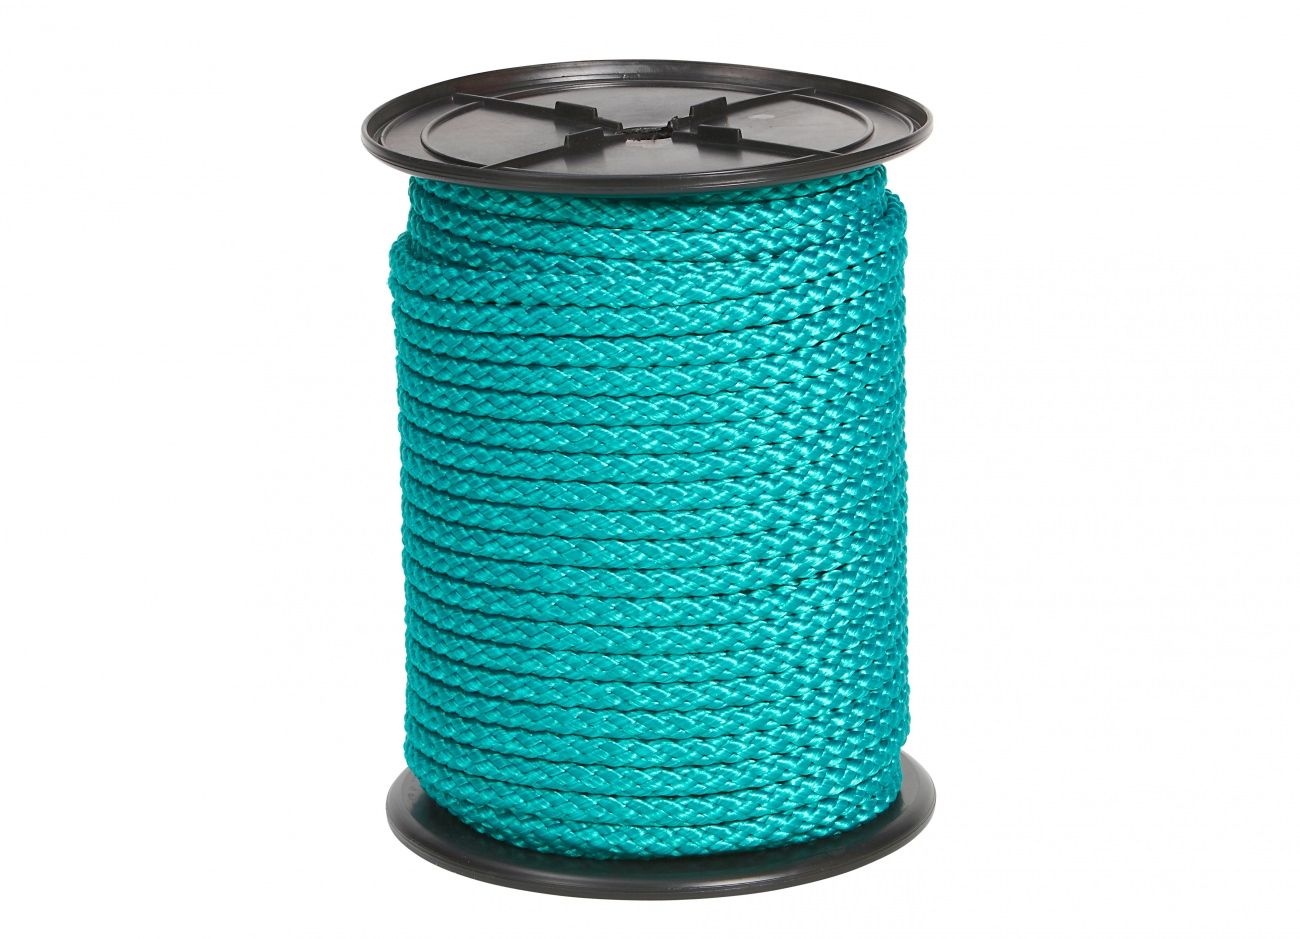 Braided Rope of Polypropylene - Spool | Safetynet365